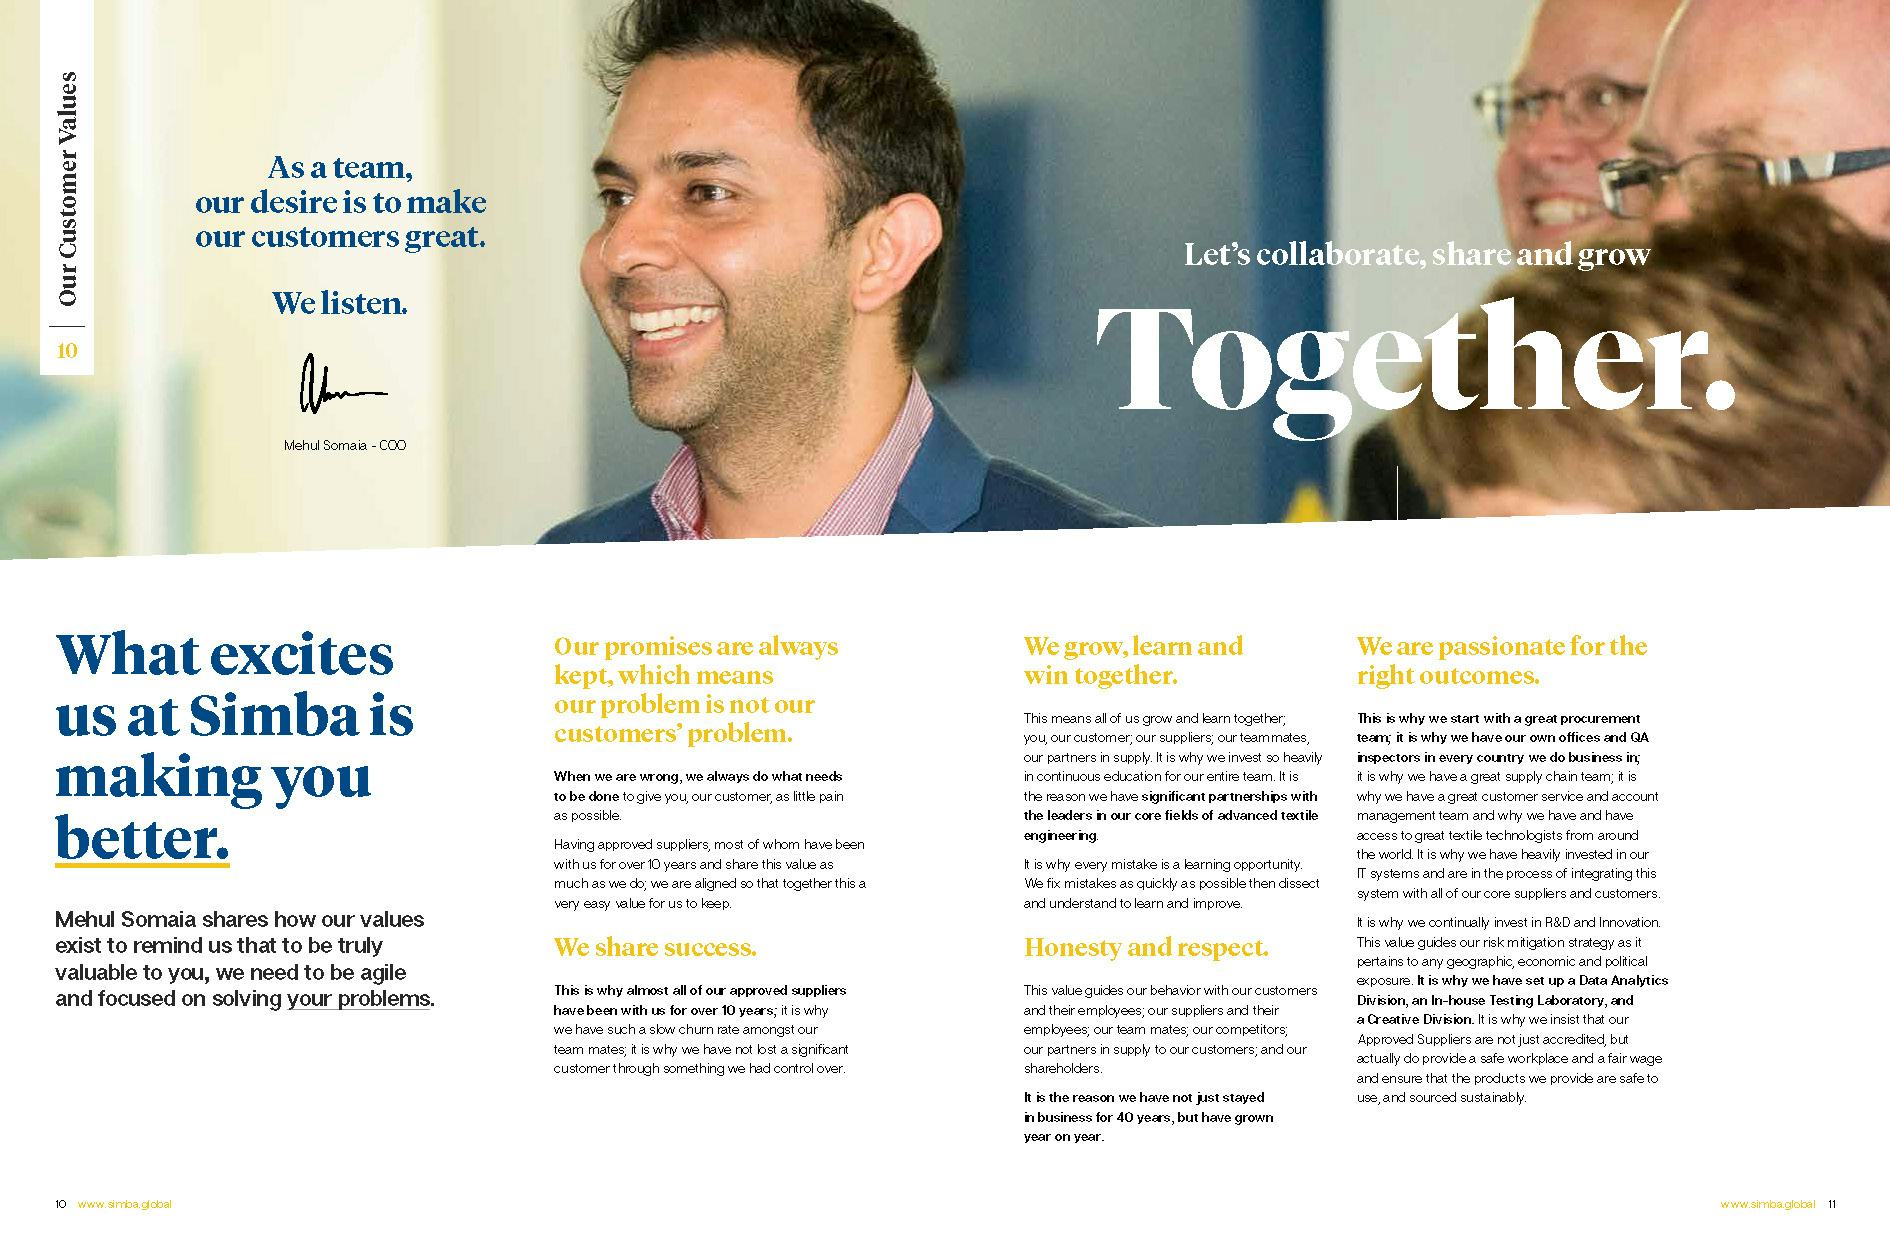 Better together page